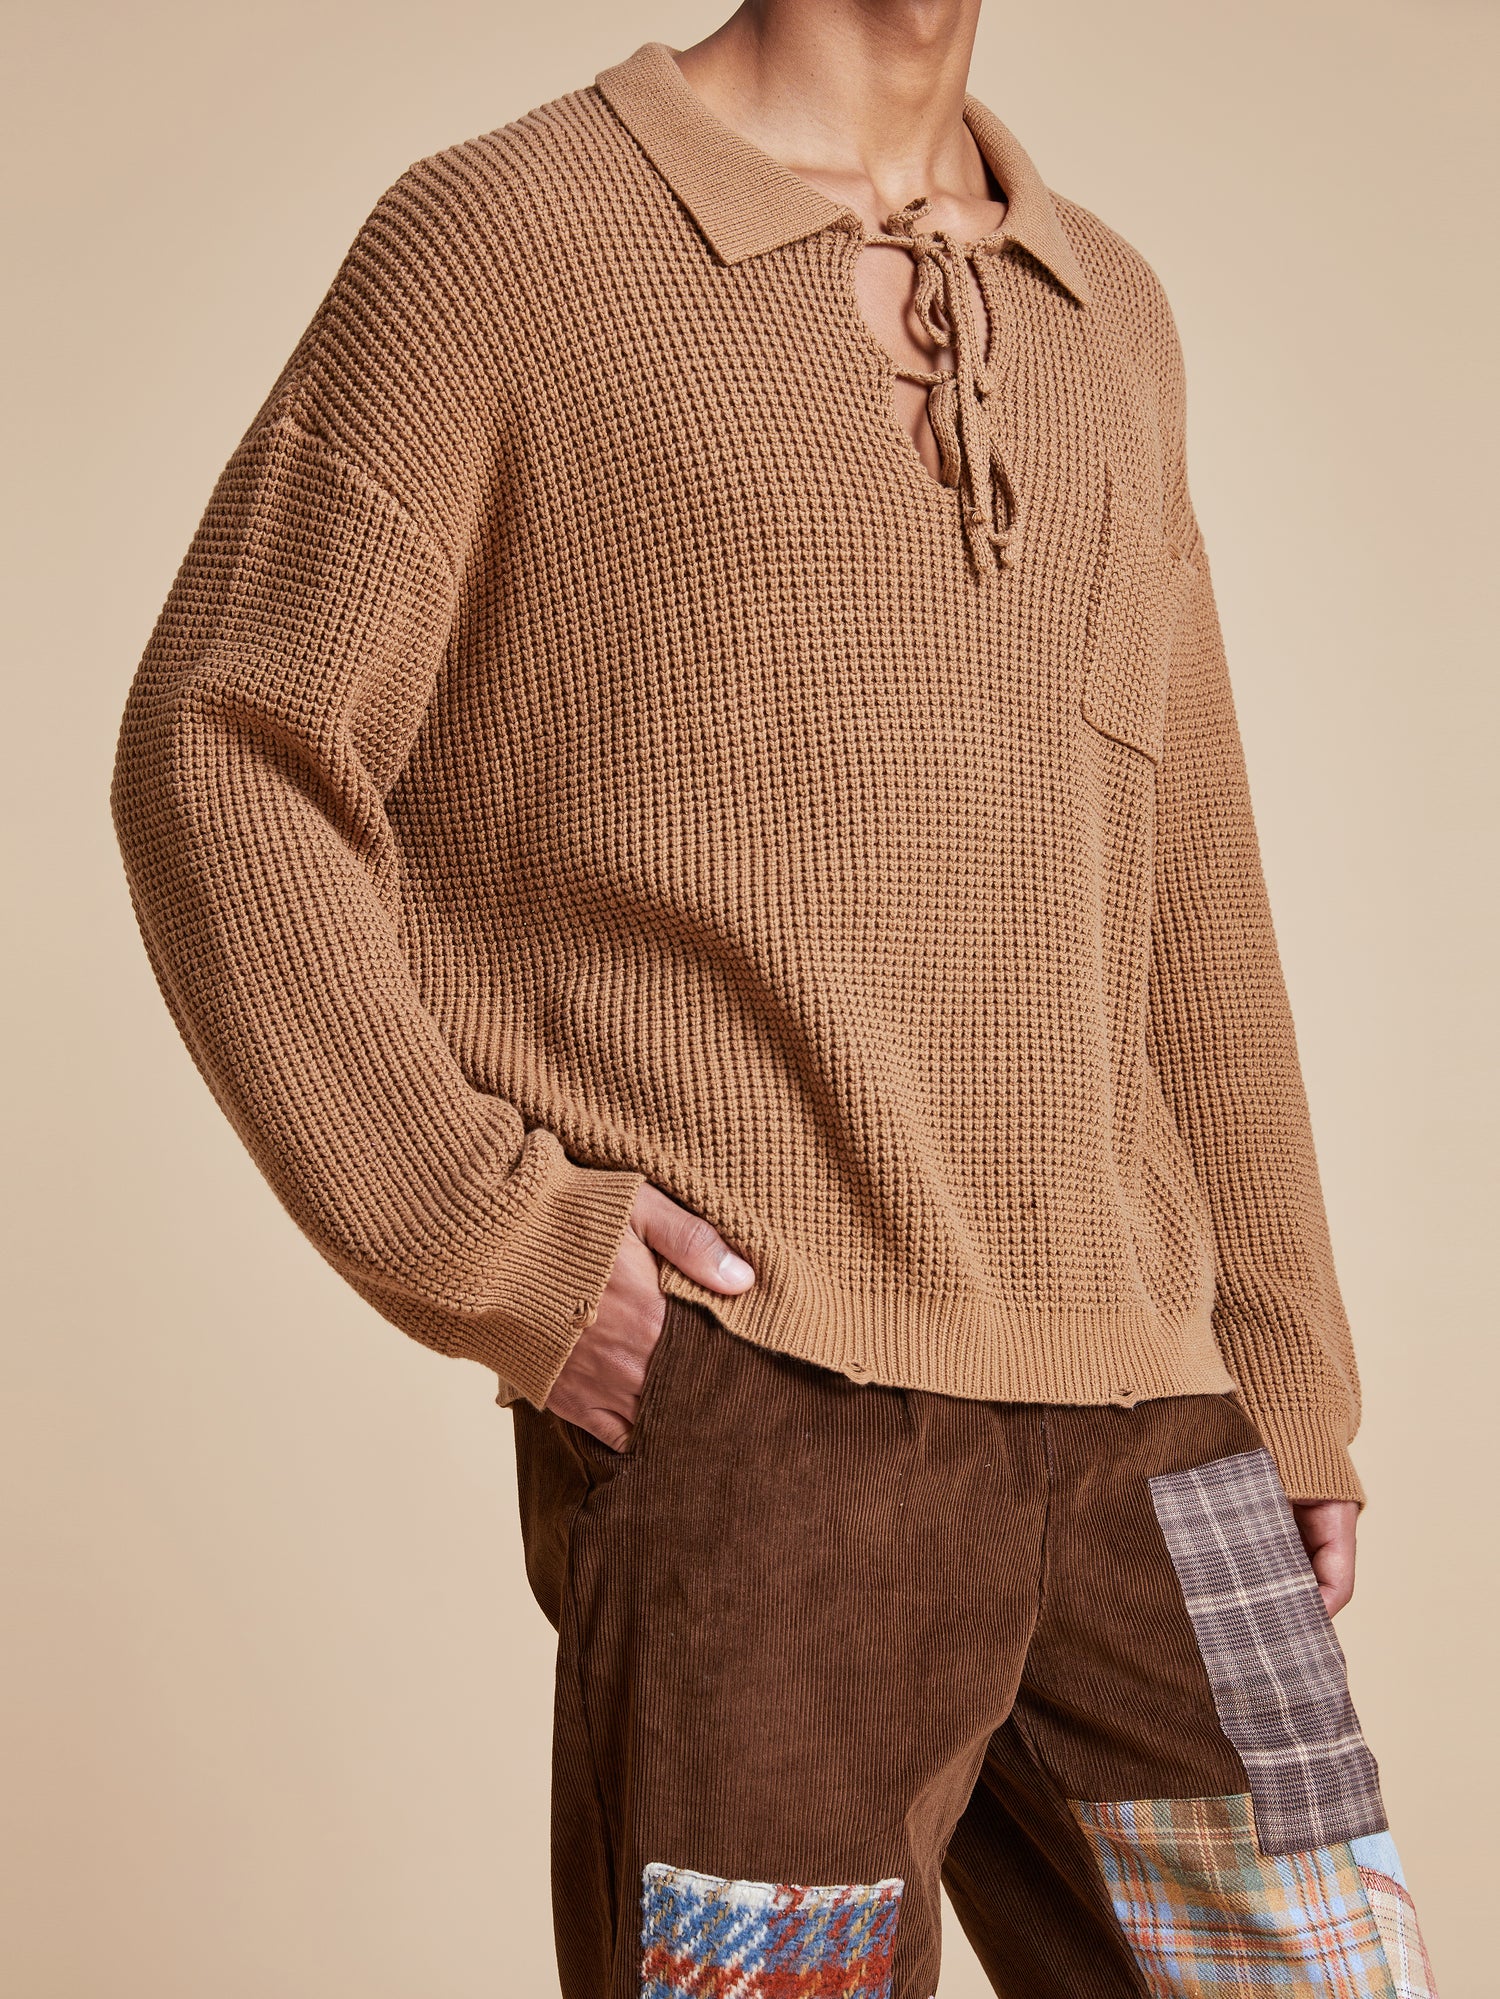 A man wearing a ginger-colored Found Tie-Collar Knit Sweater with cozy feel.